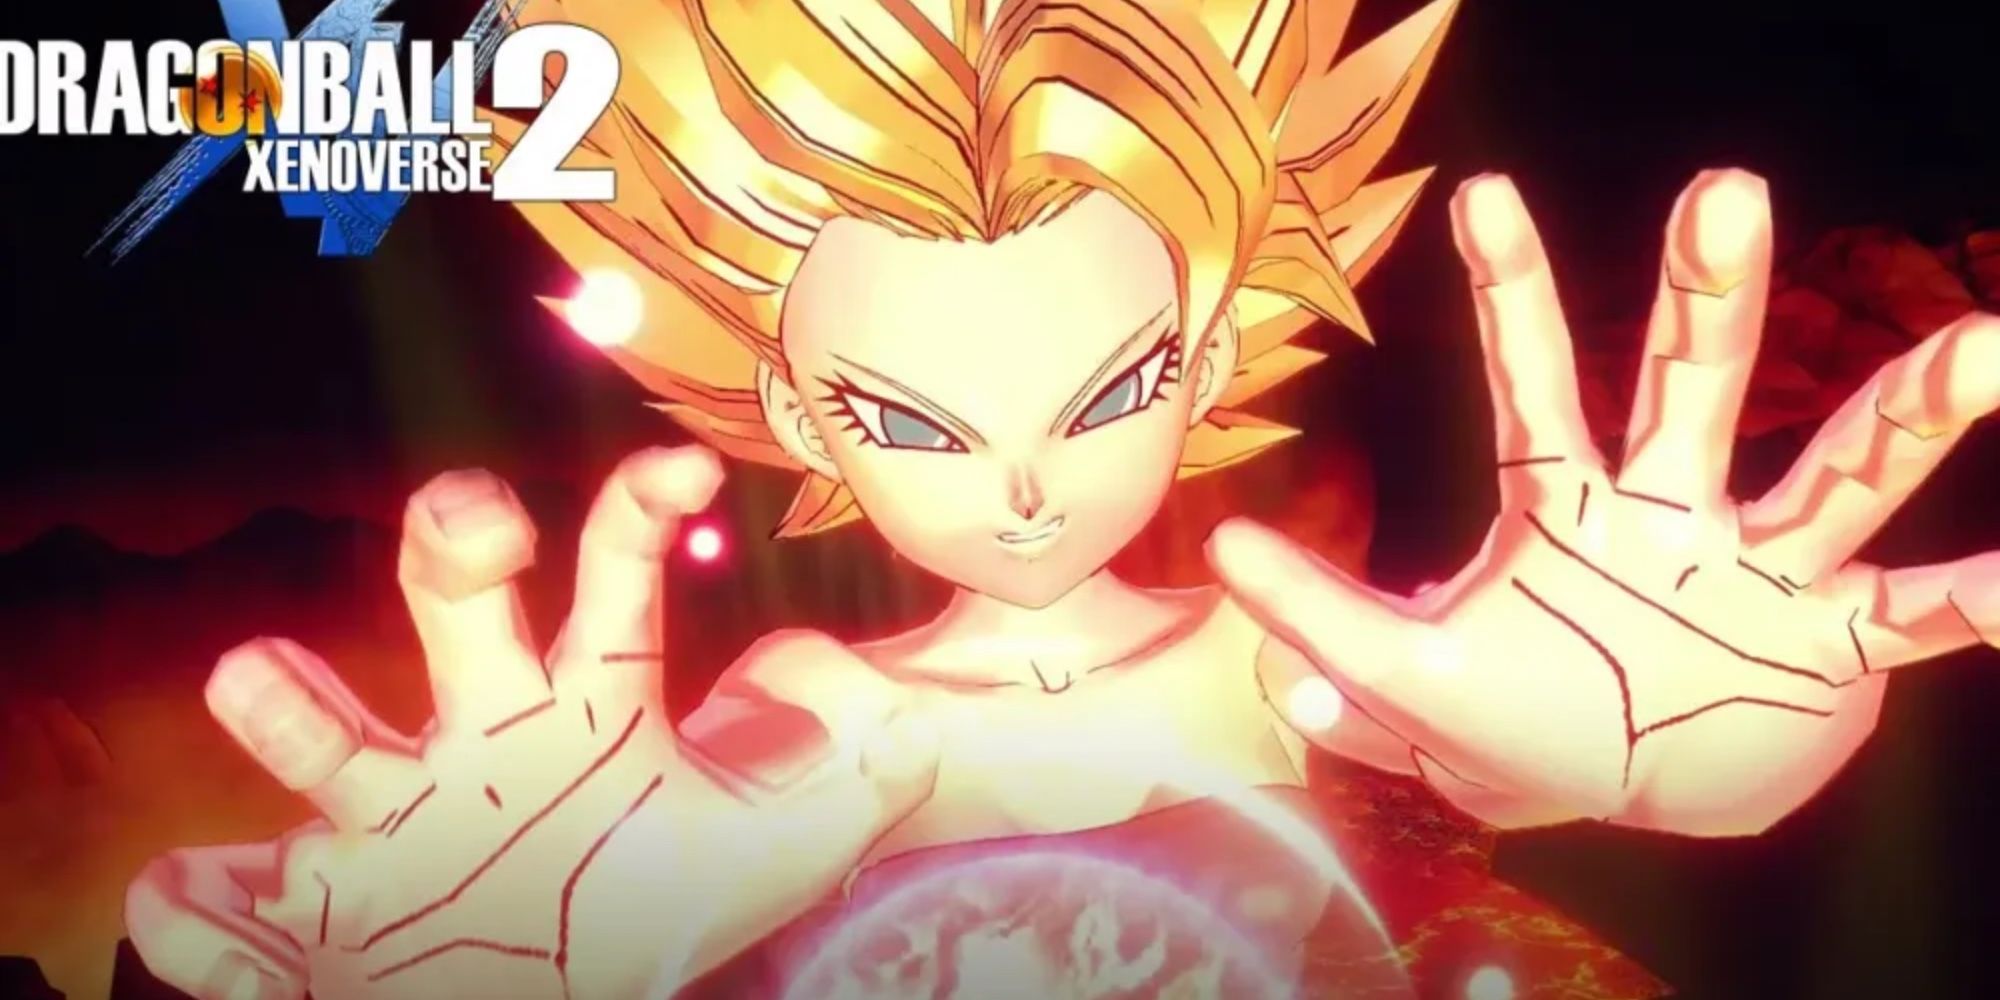 Dragon Ball Xenoverse 2 Legendary Pack 1 Gets Extended Trailer